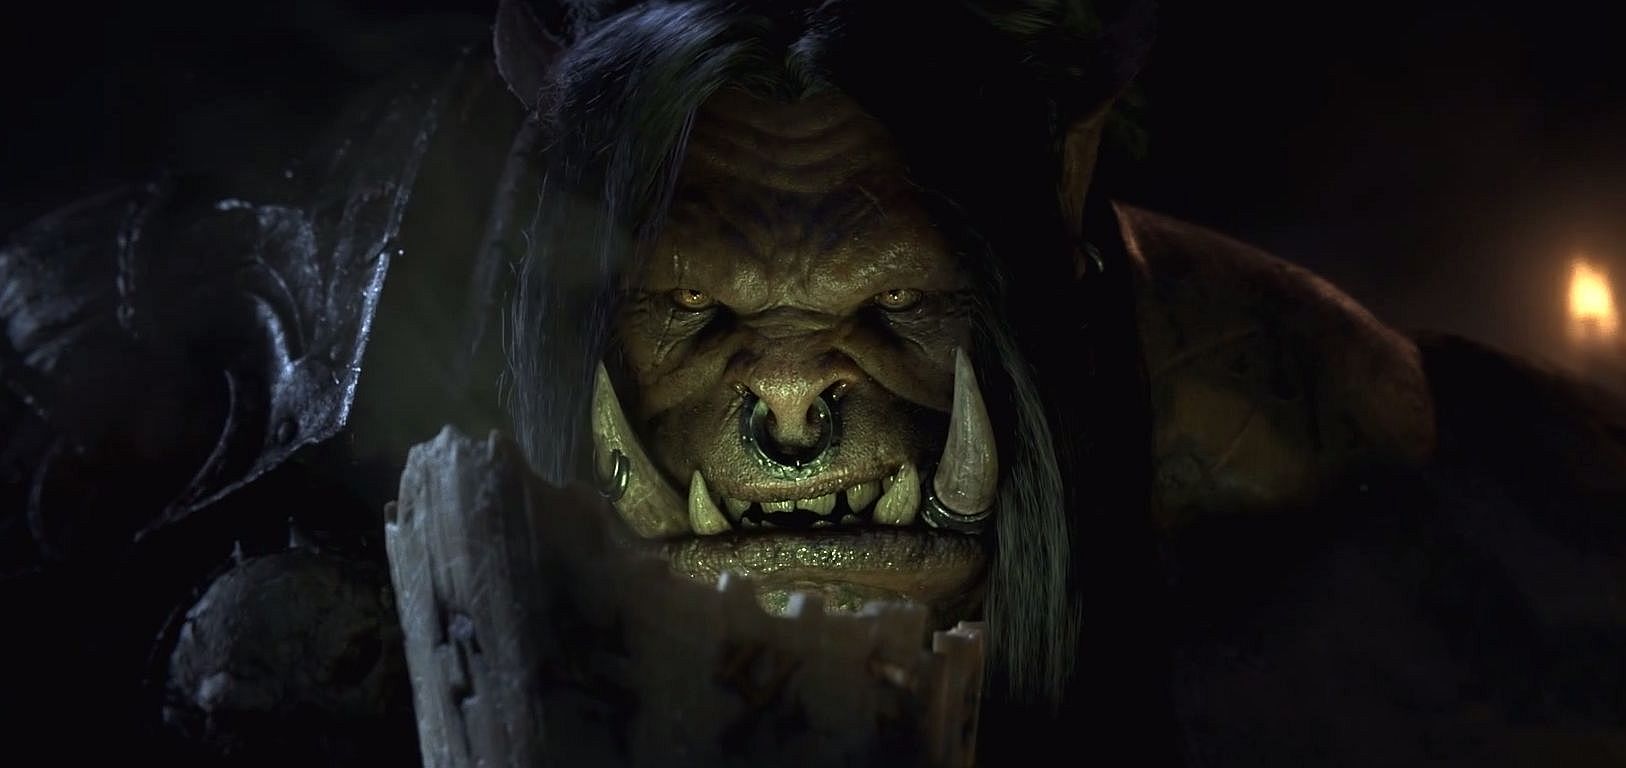 Image for World of Warcraft is "hard to watch", says Blizzard eSports boss